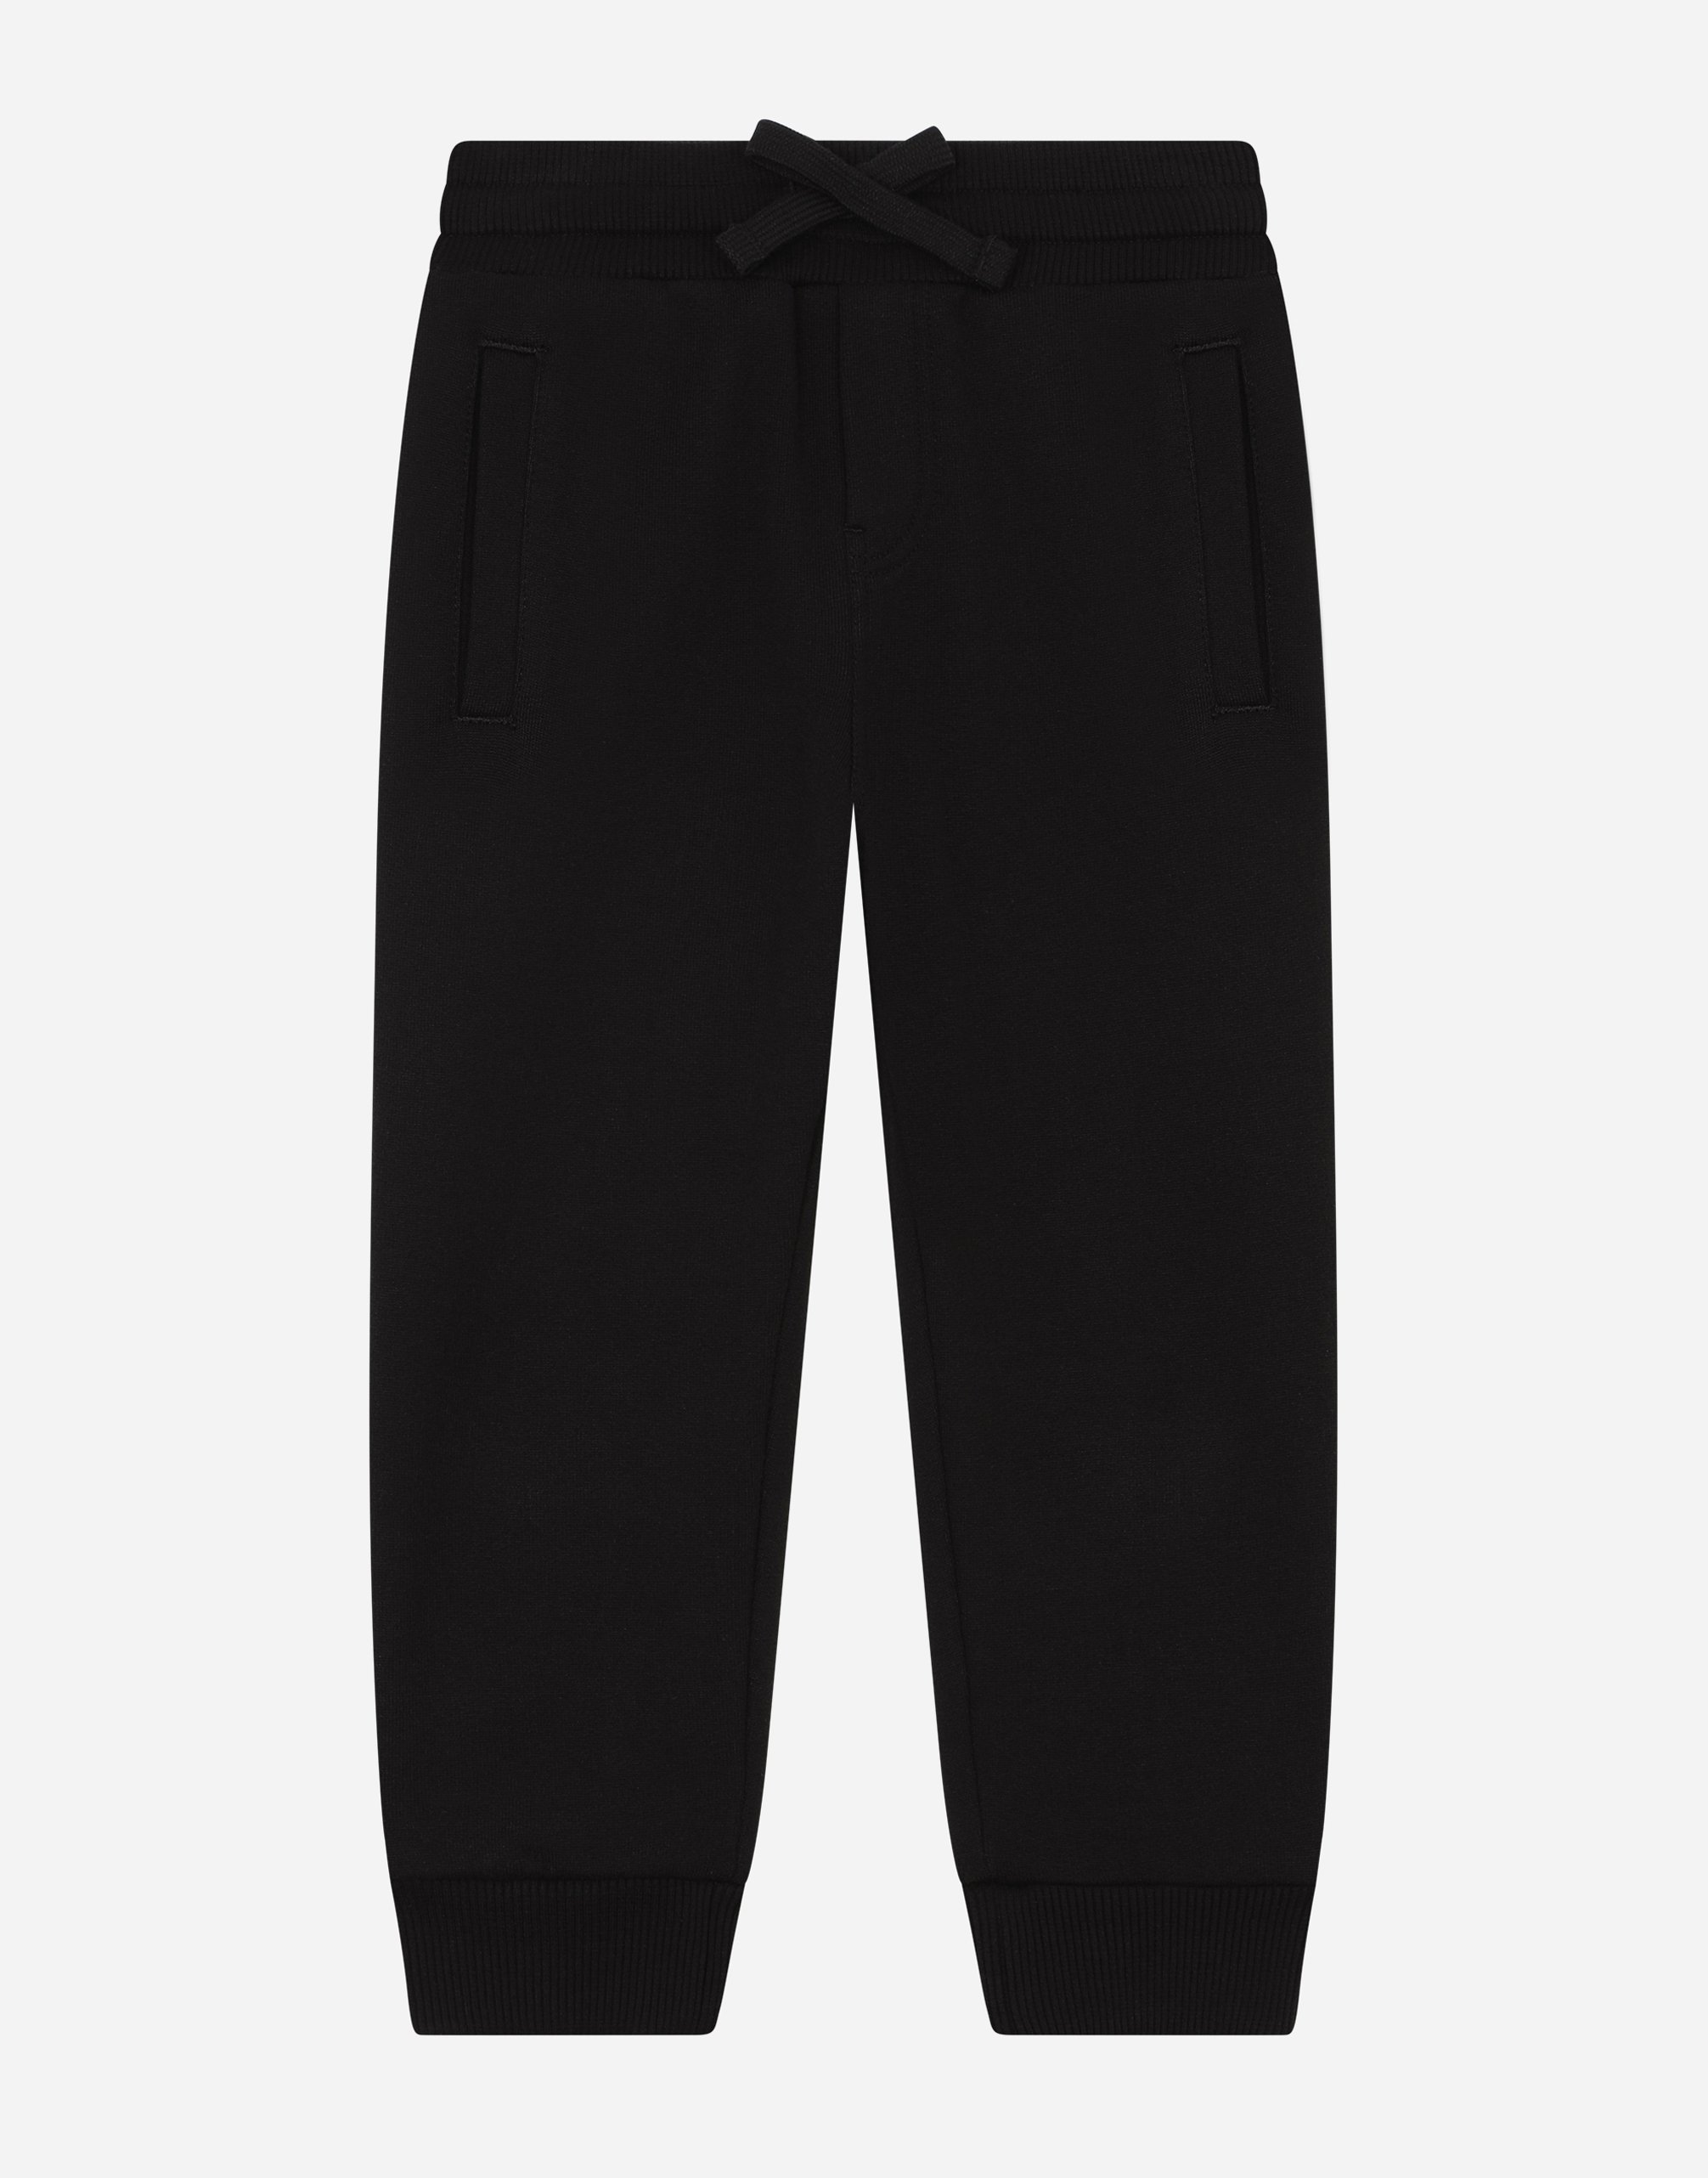 Jersey jogging pants with plate in Black